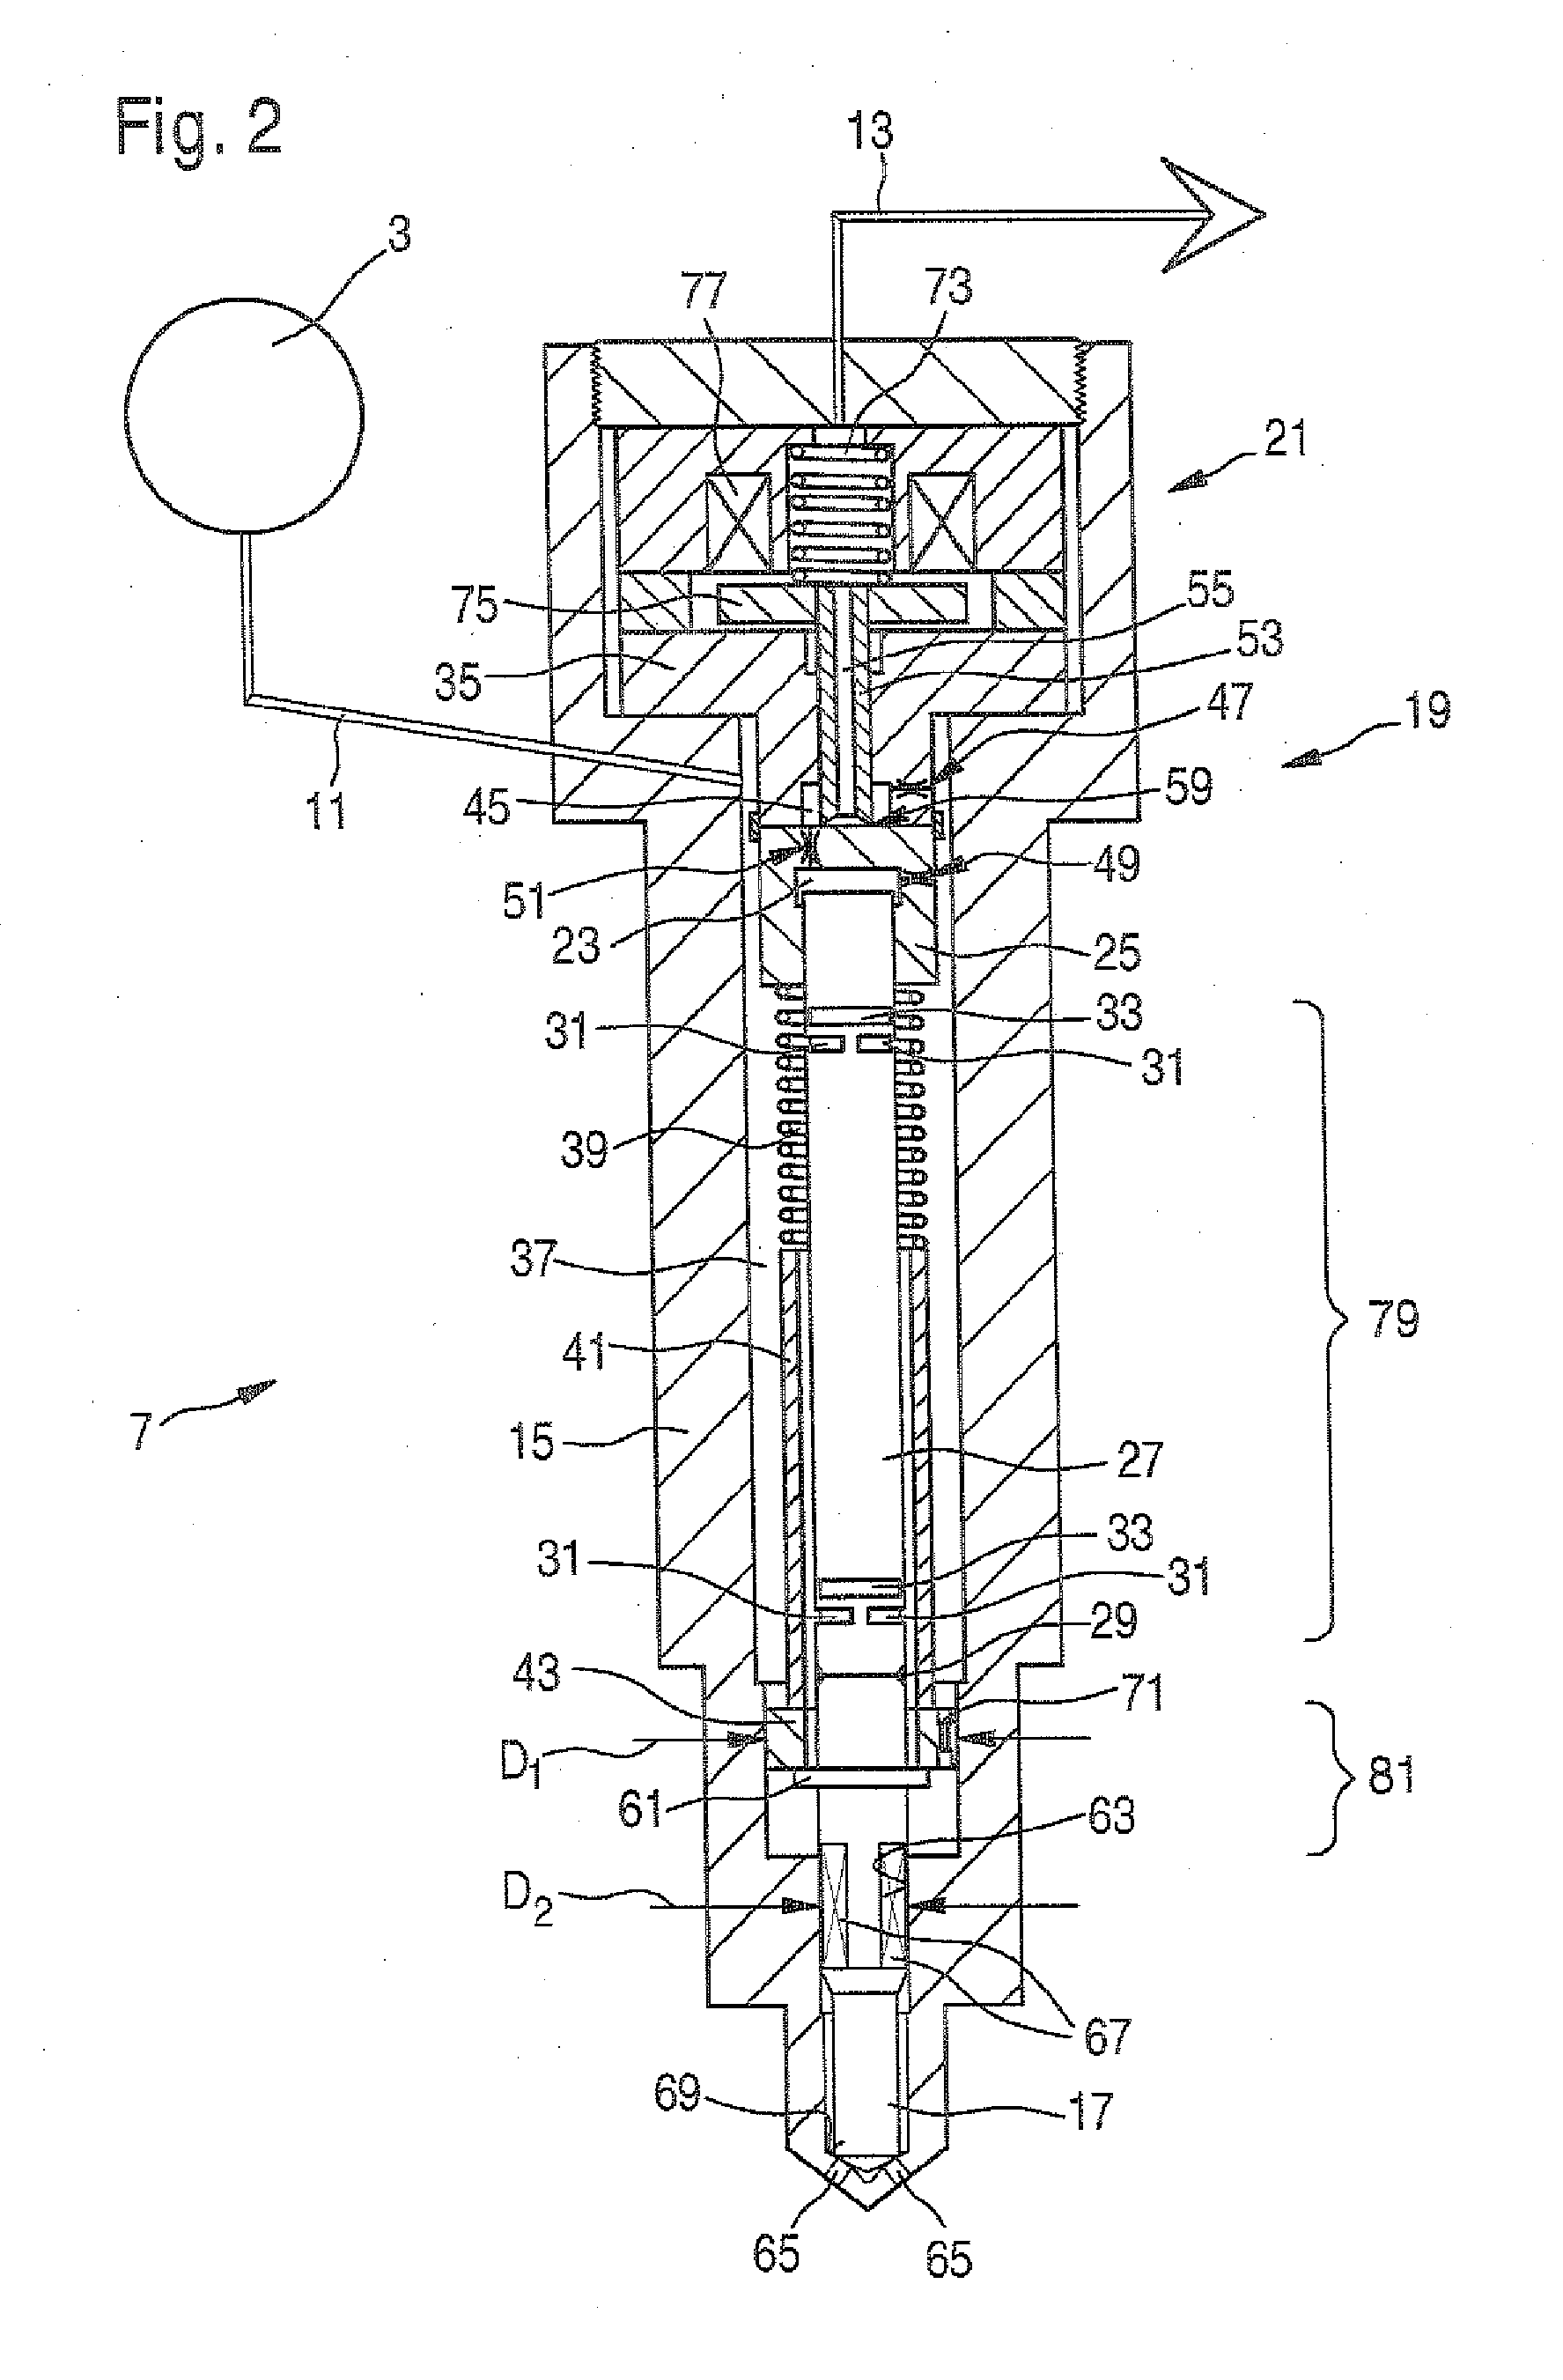 Injector for a fuel injection system